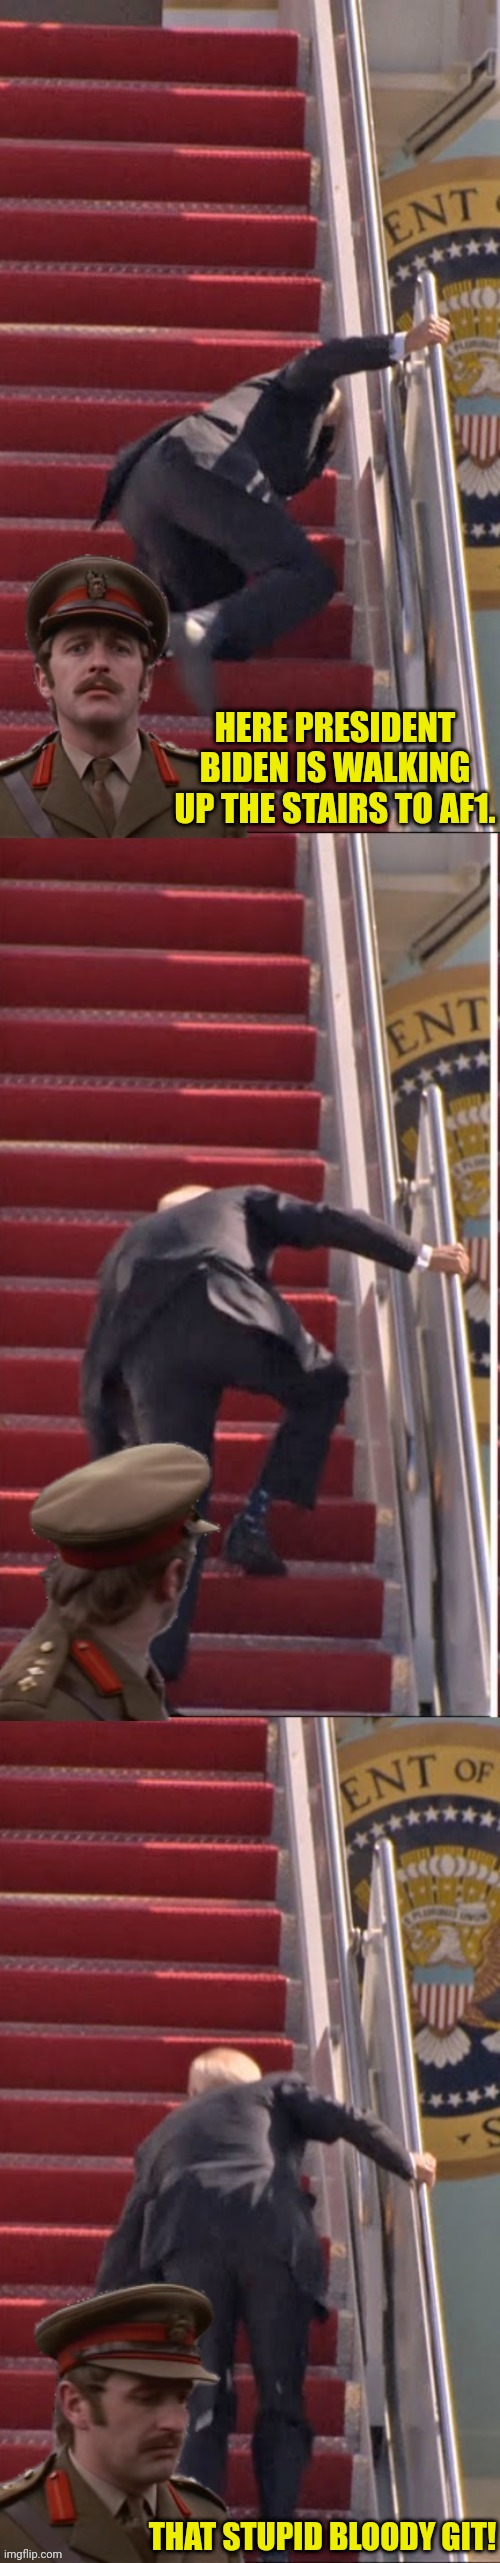 It's to Silly | HERE PRESIDENT BIDEN IS WALKING UP THE STAIRS TO AF1. THAT STUPID BLOODY GIT! | image tagged in monty python,joe biden,stairs | made w/ Imgflip meme maker